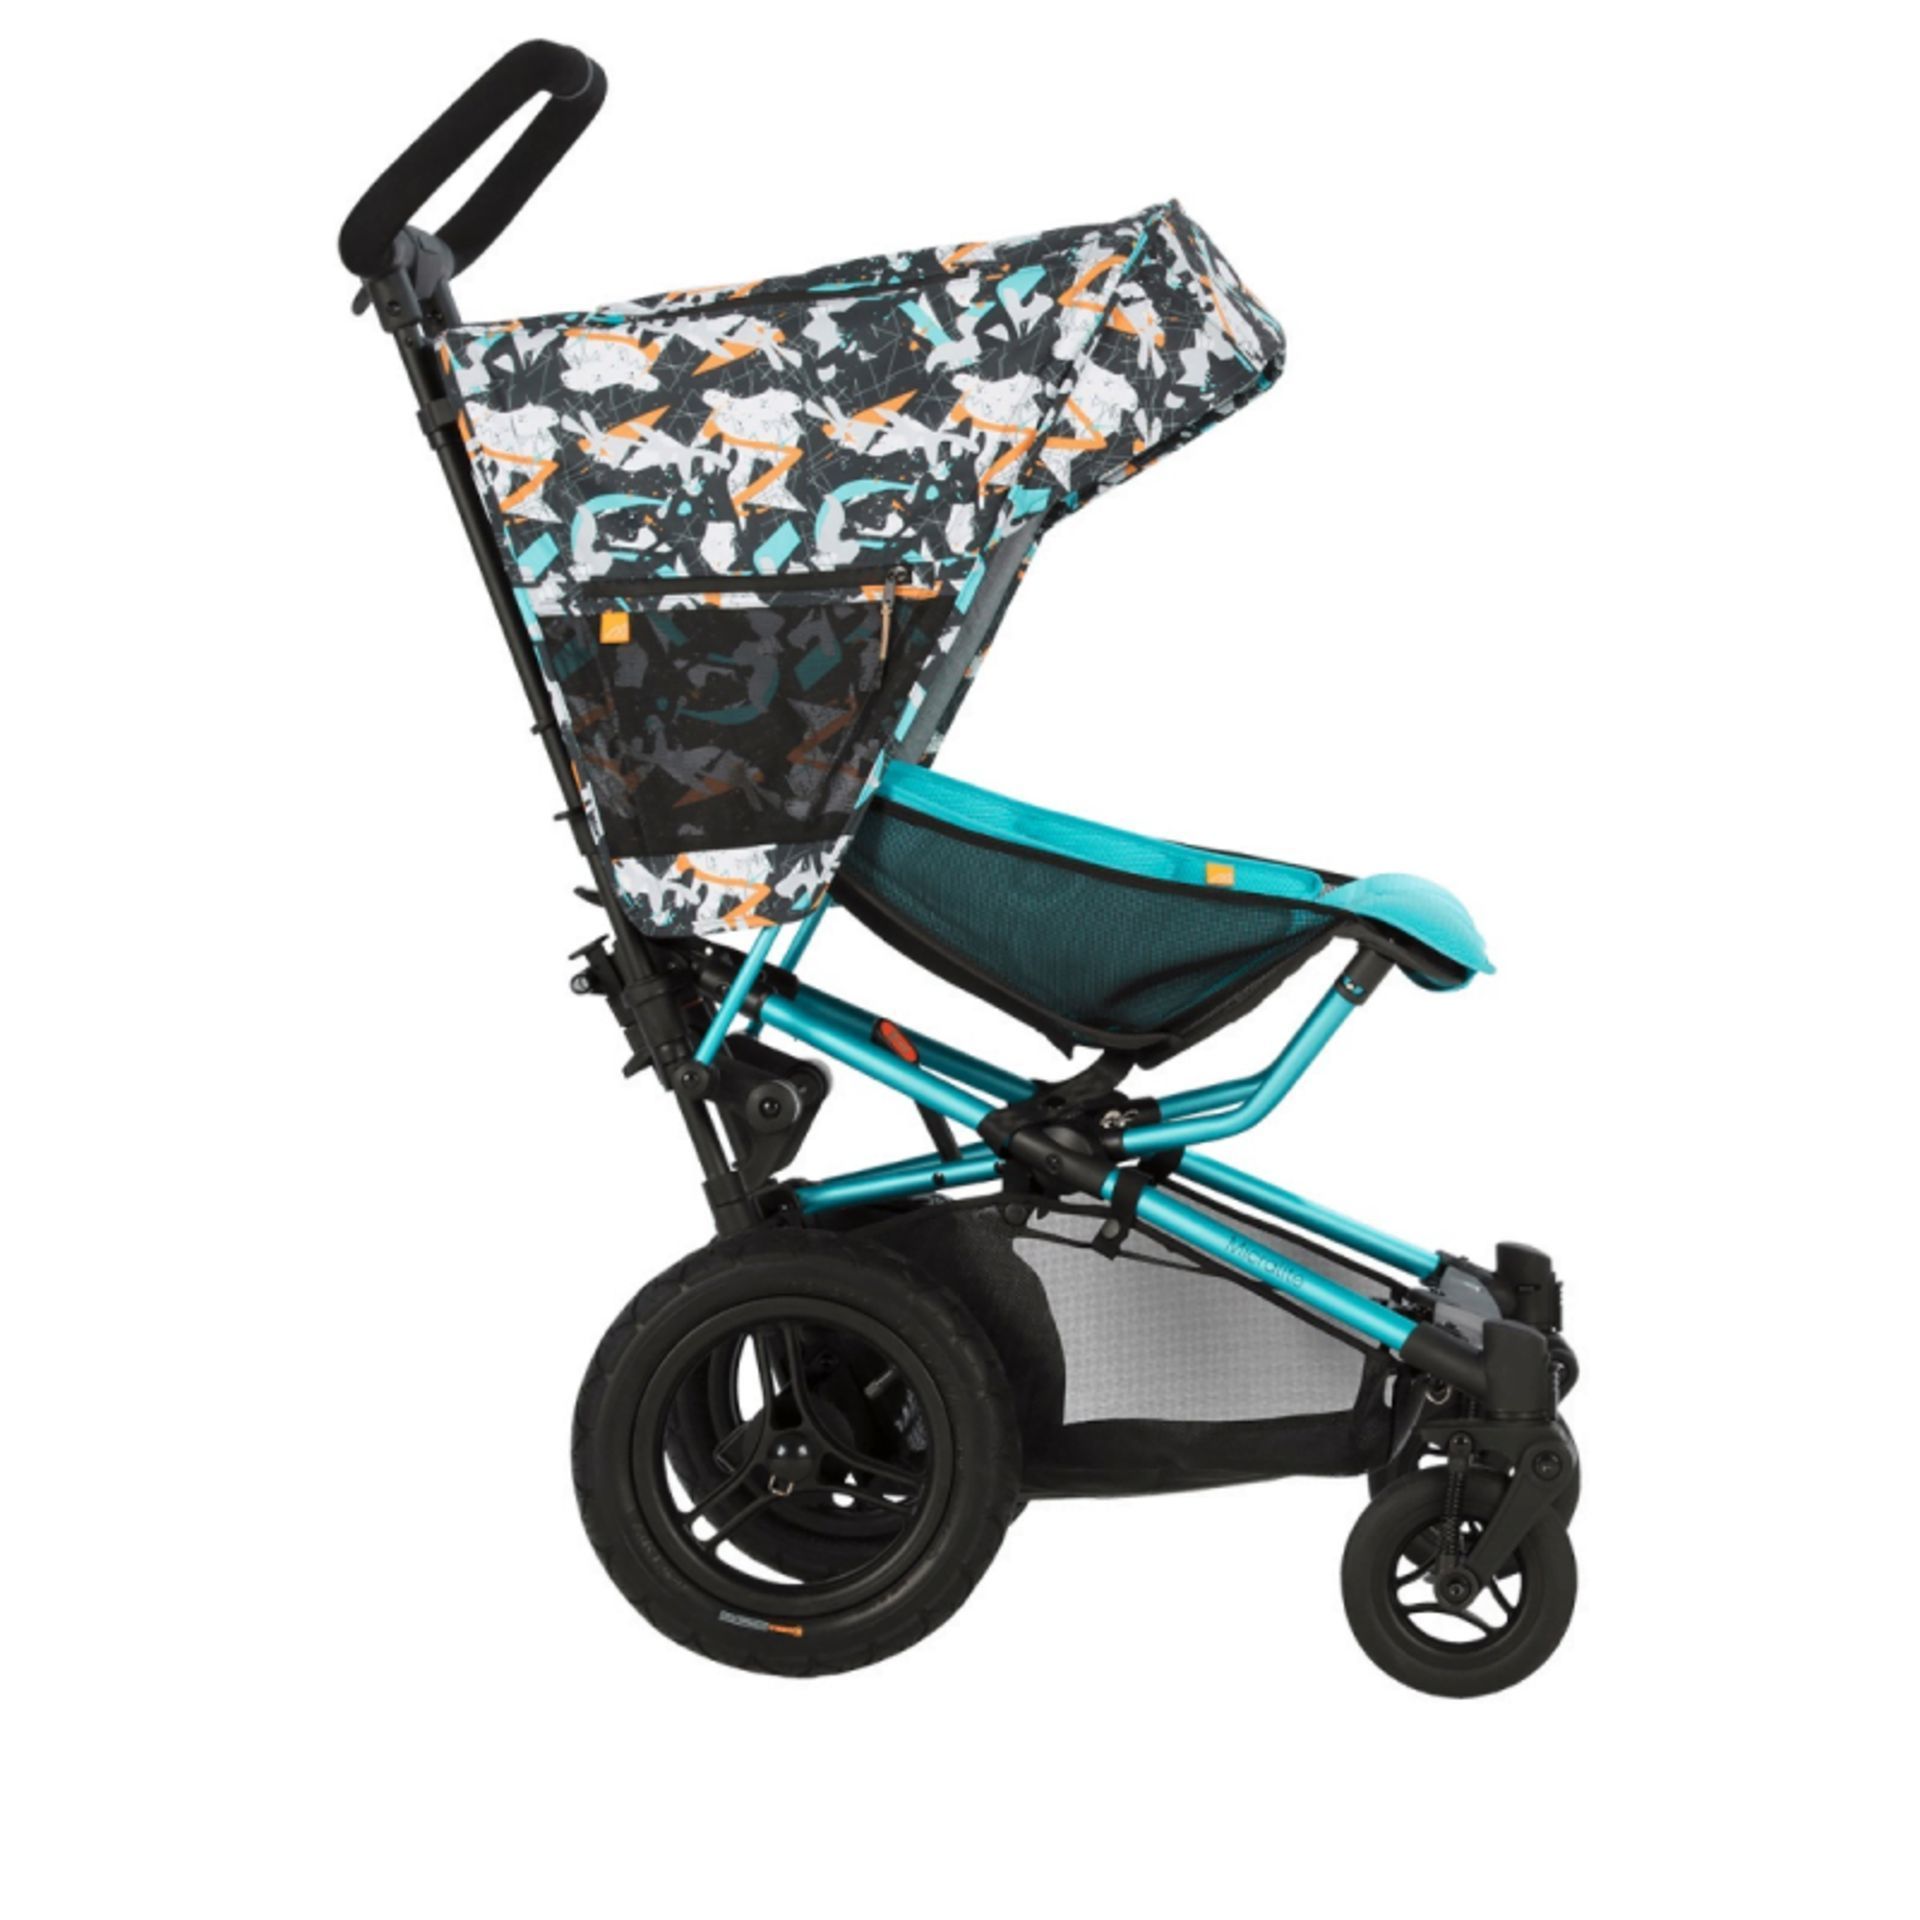 New & Boxed Micralite by Silver Cross FastFold Special Edition Stroller – Festival. RRP £550. The - Image 2 of 3